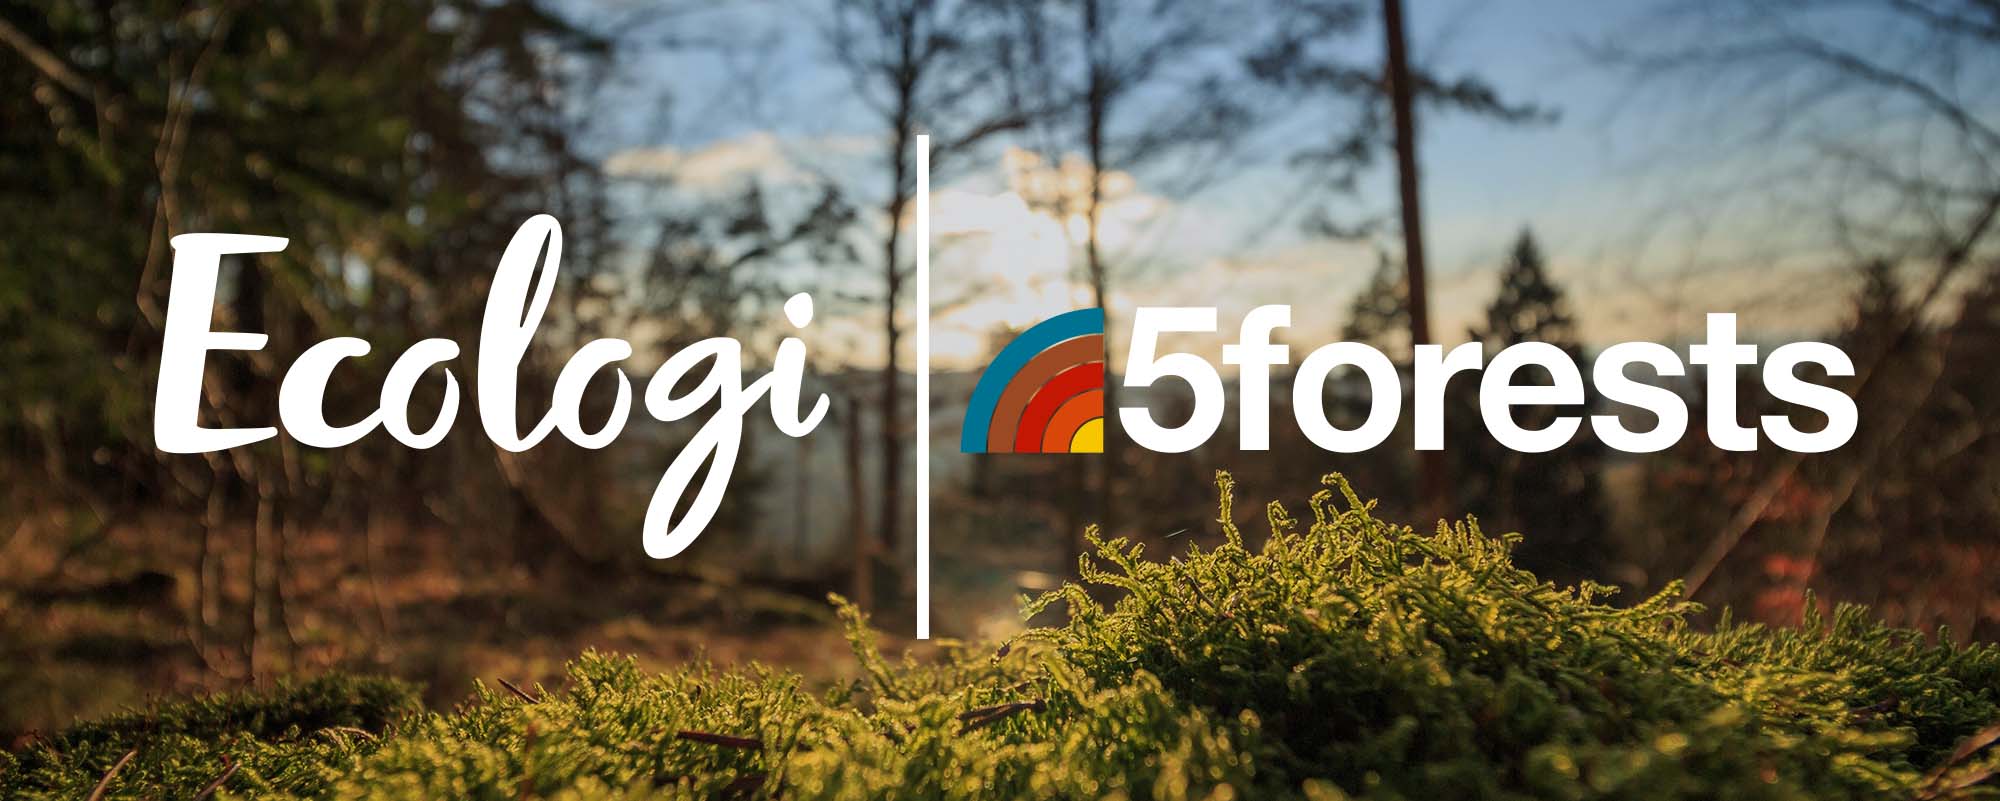 Banner featuring brand logos for Ecologi and 5forests, background of forest floor, trees, and blue sky.